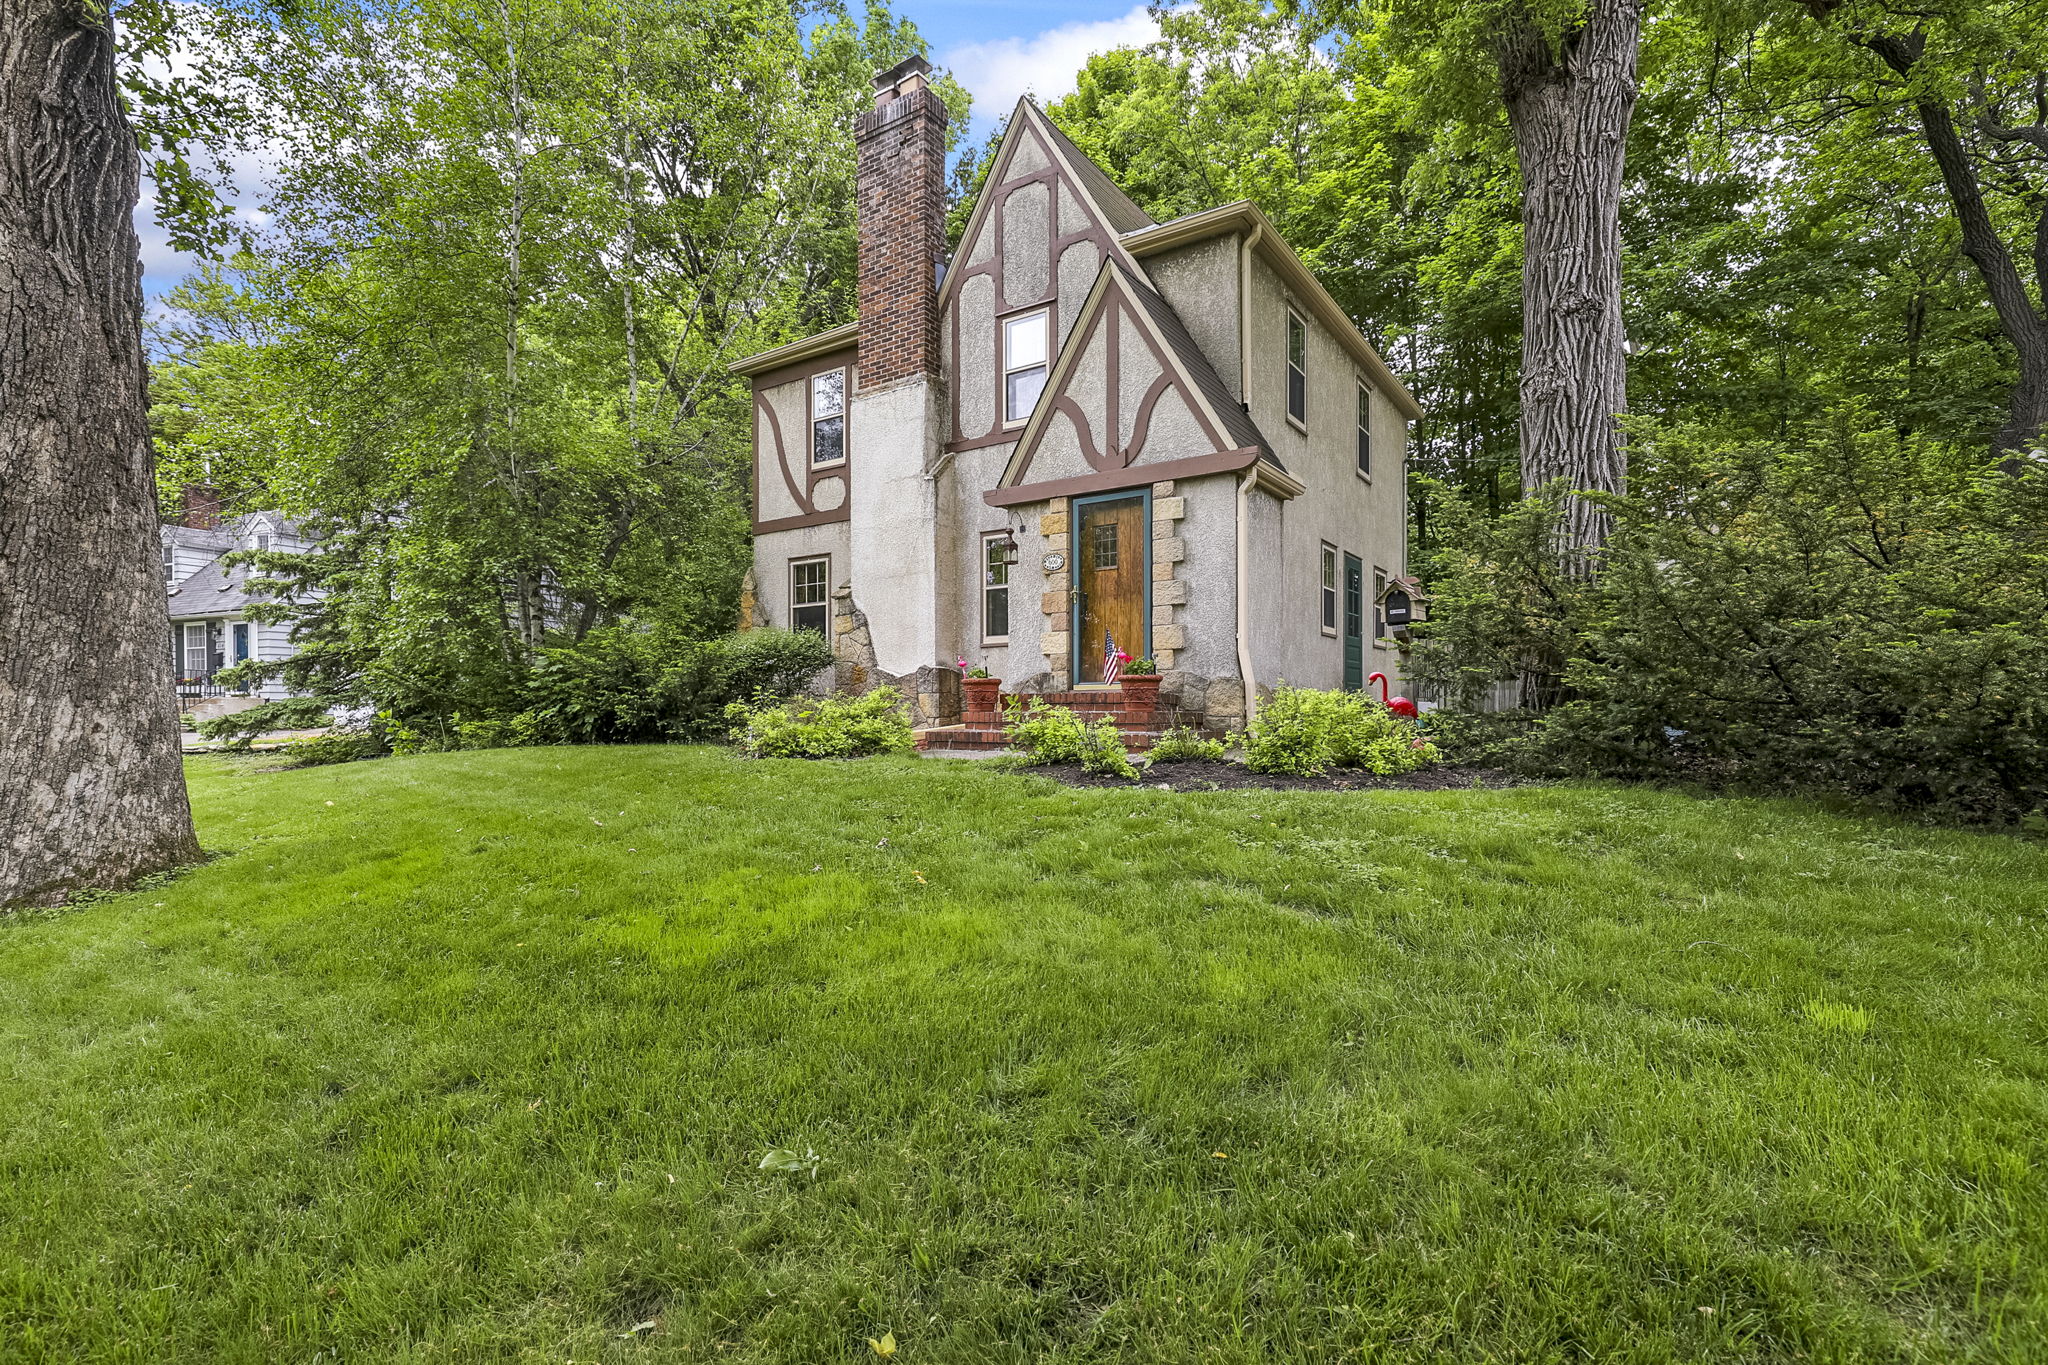  600 Pleasant Street, Excelsior, MN 55331, US